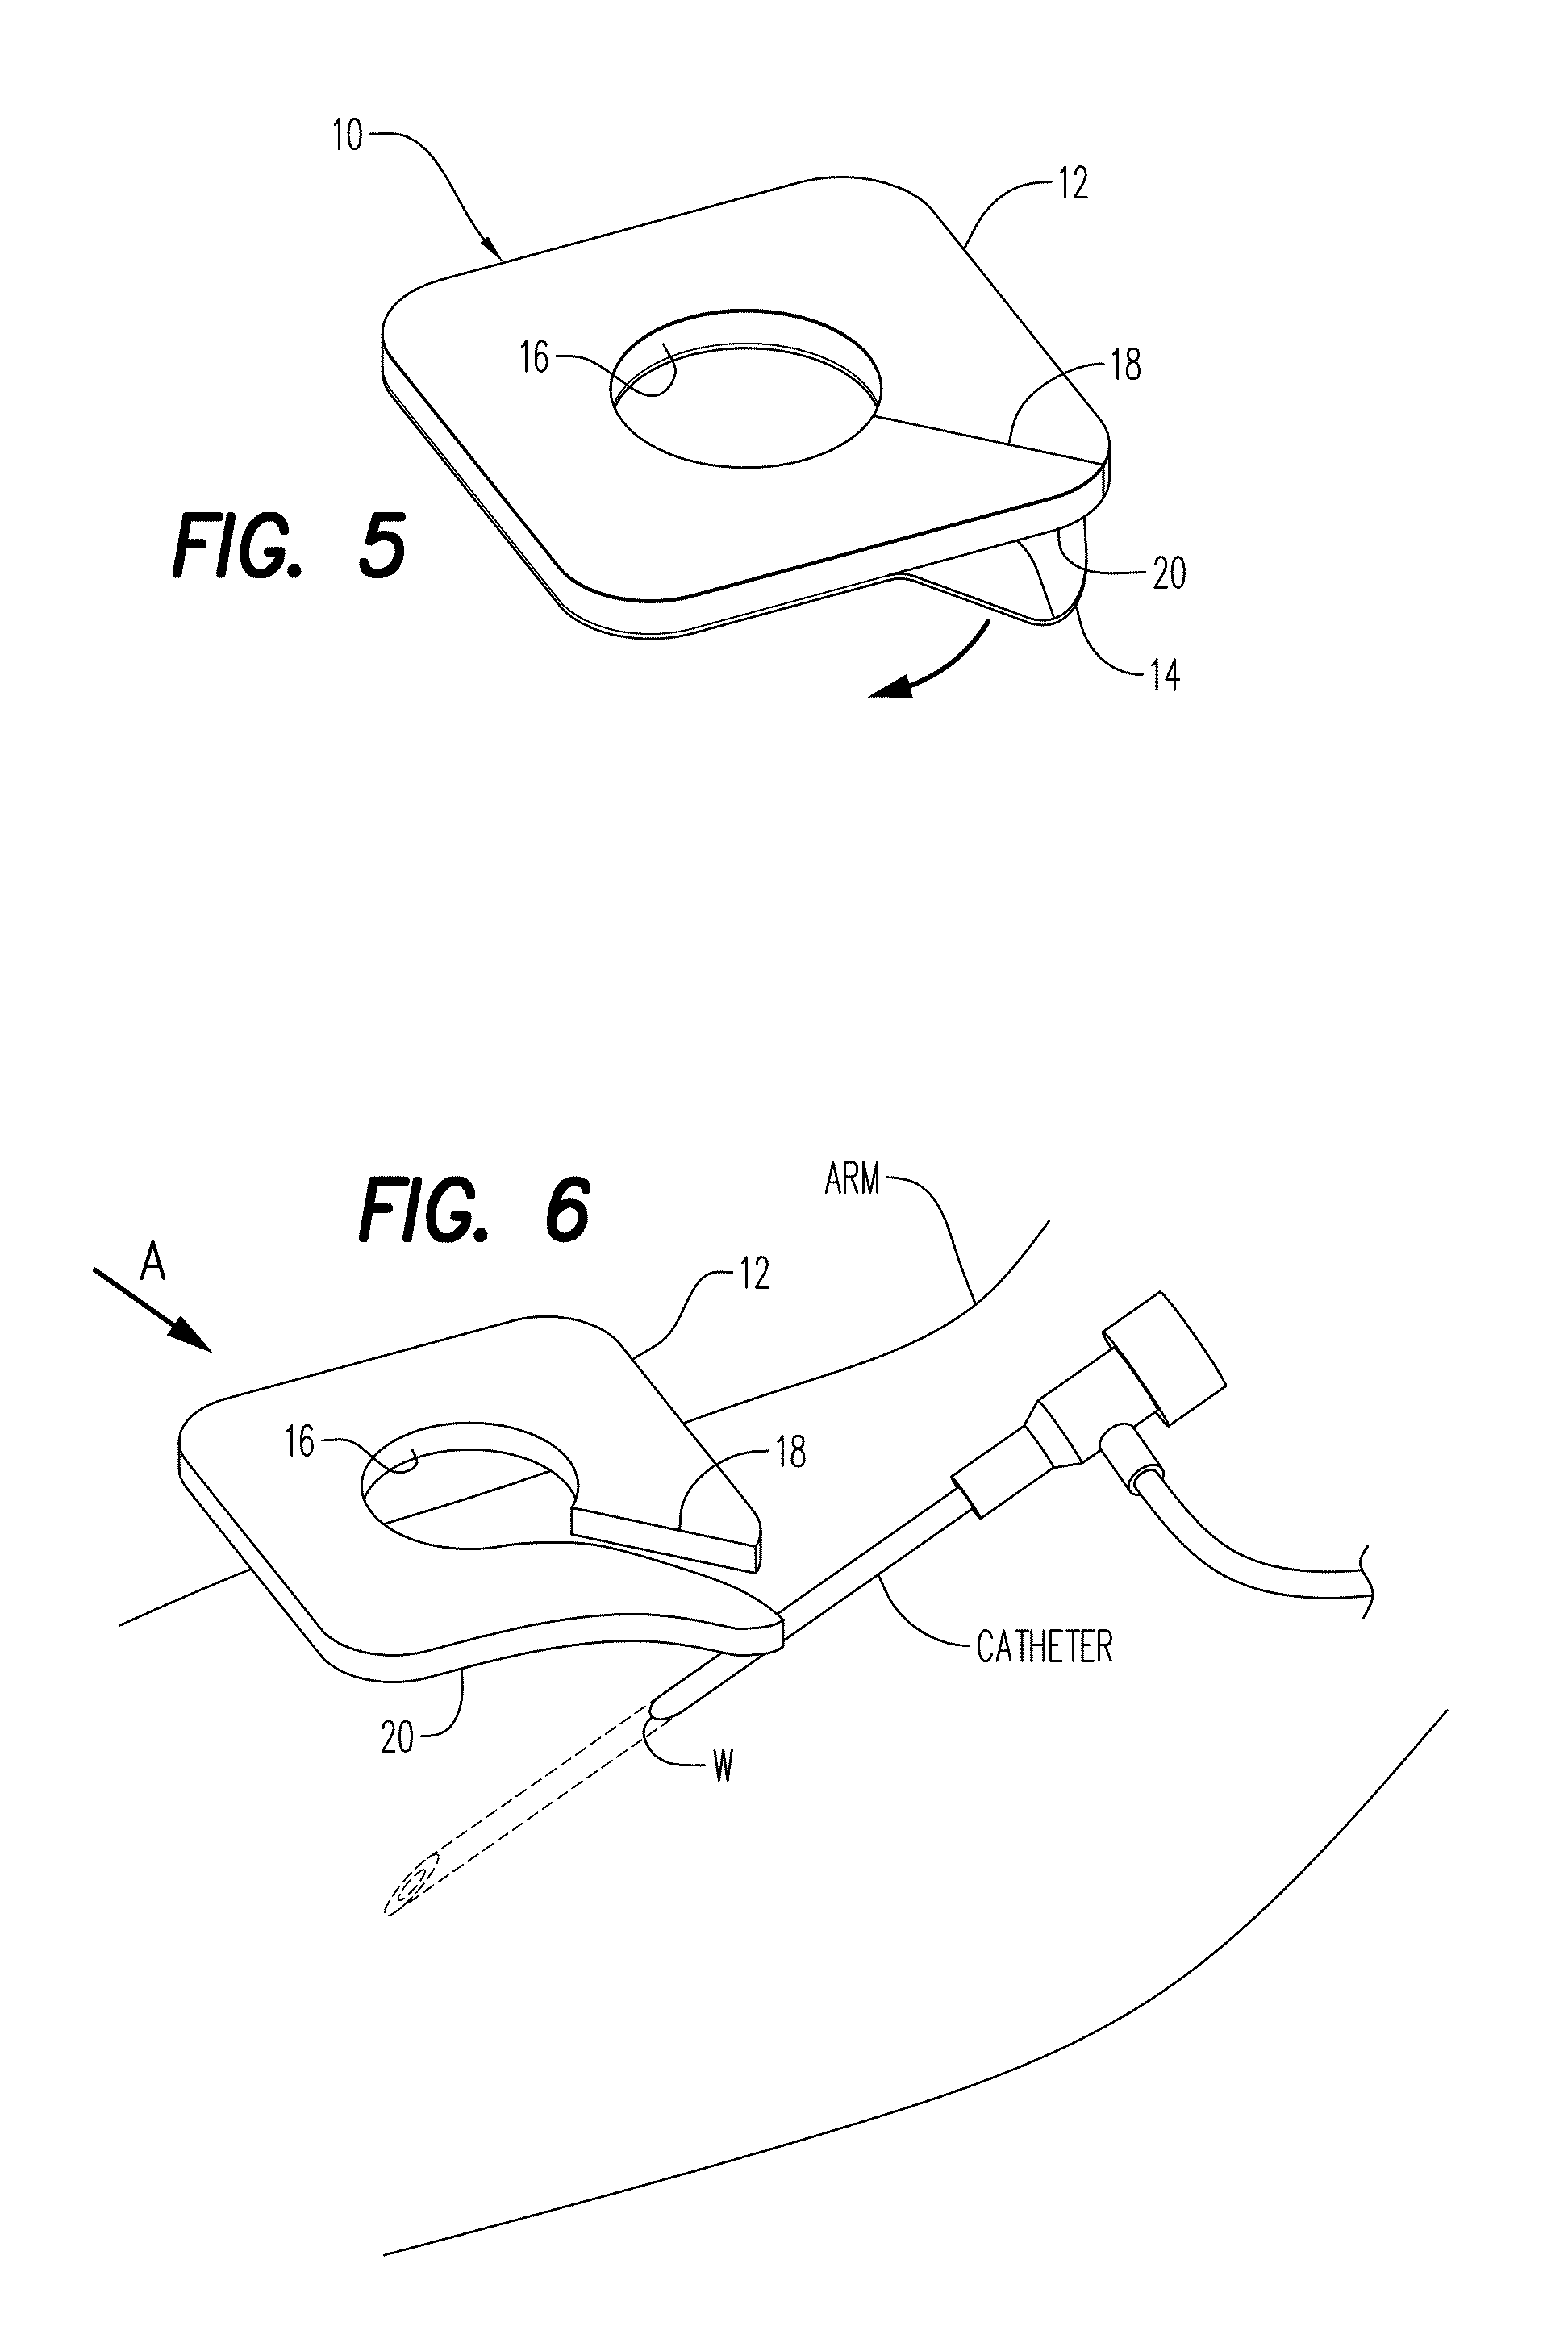 Method of reducing infections and/or air embolisms associated with vascular access procedures